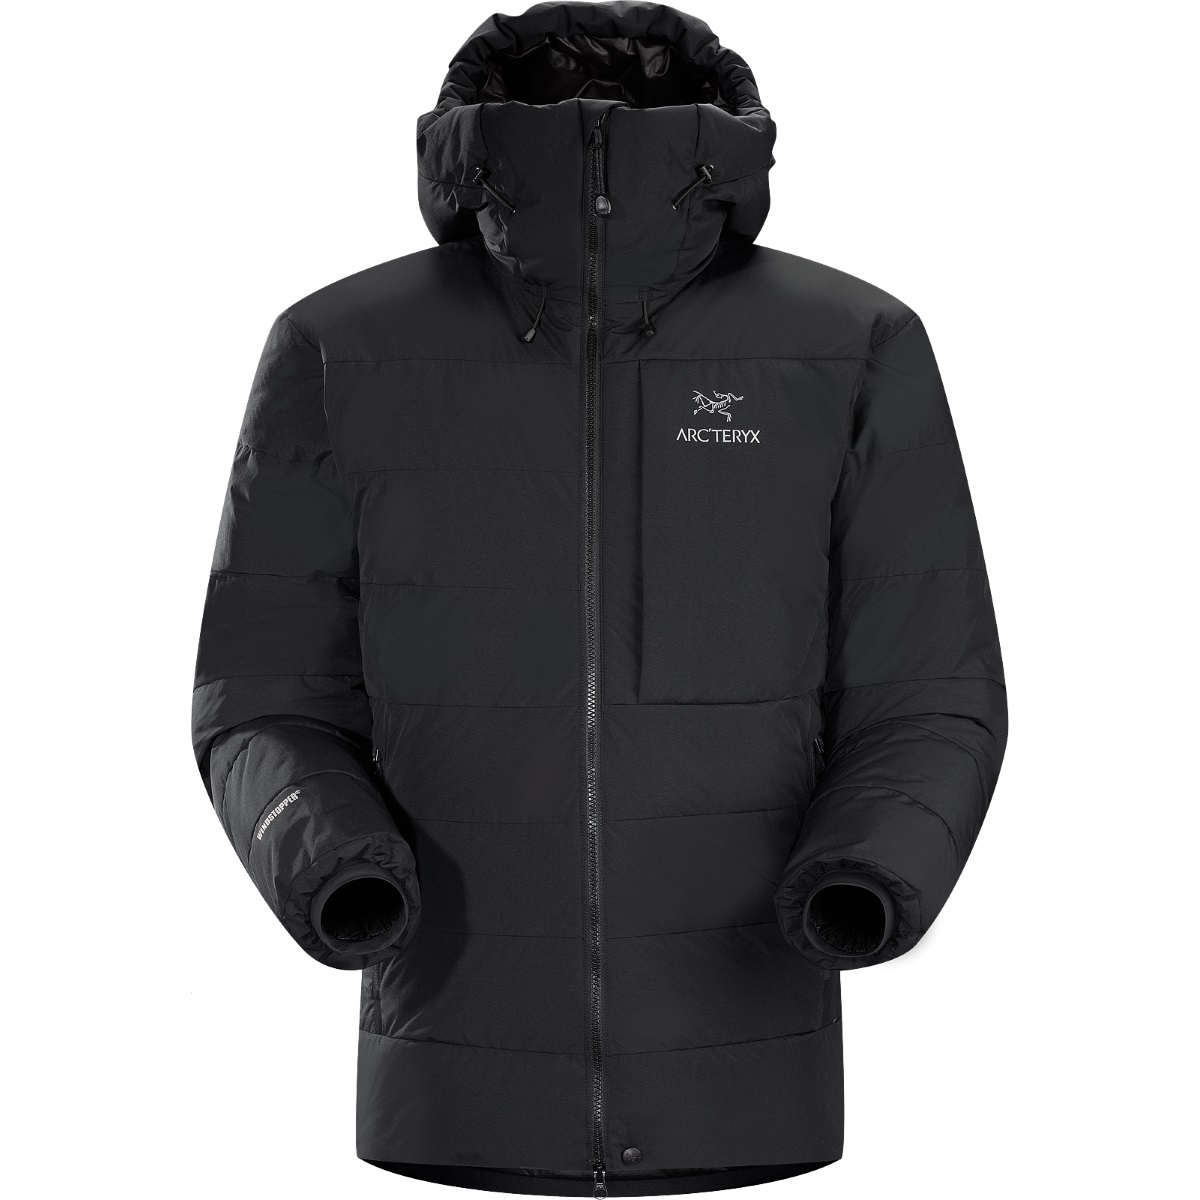 Arc'teryx Ceres Jacket, men's, discontinued colors (free ground ...